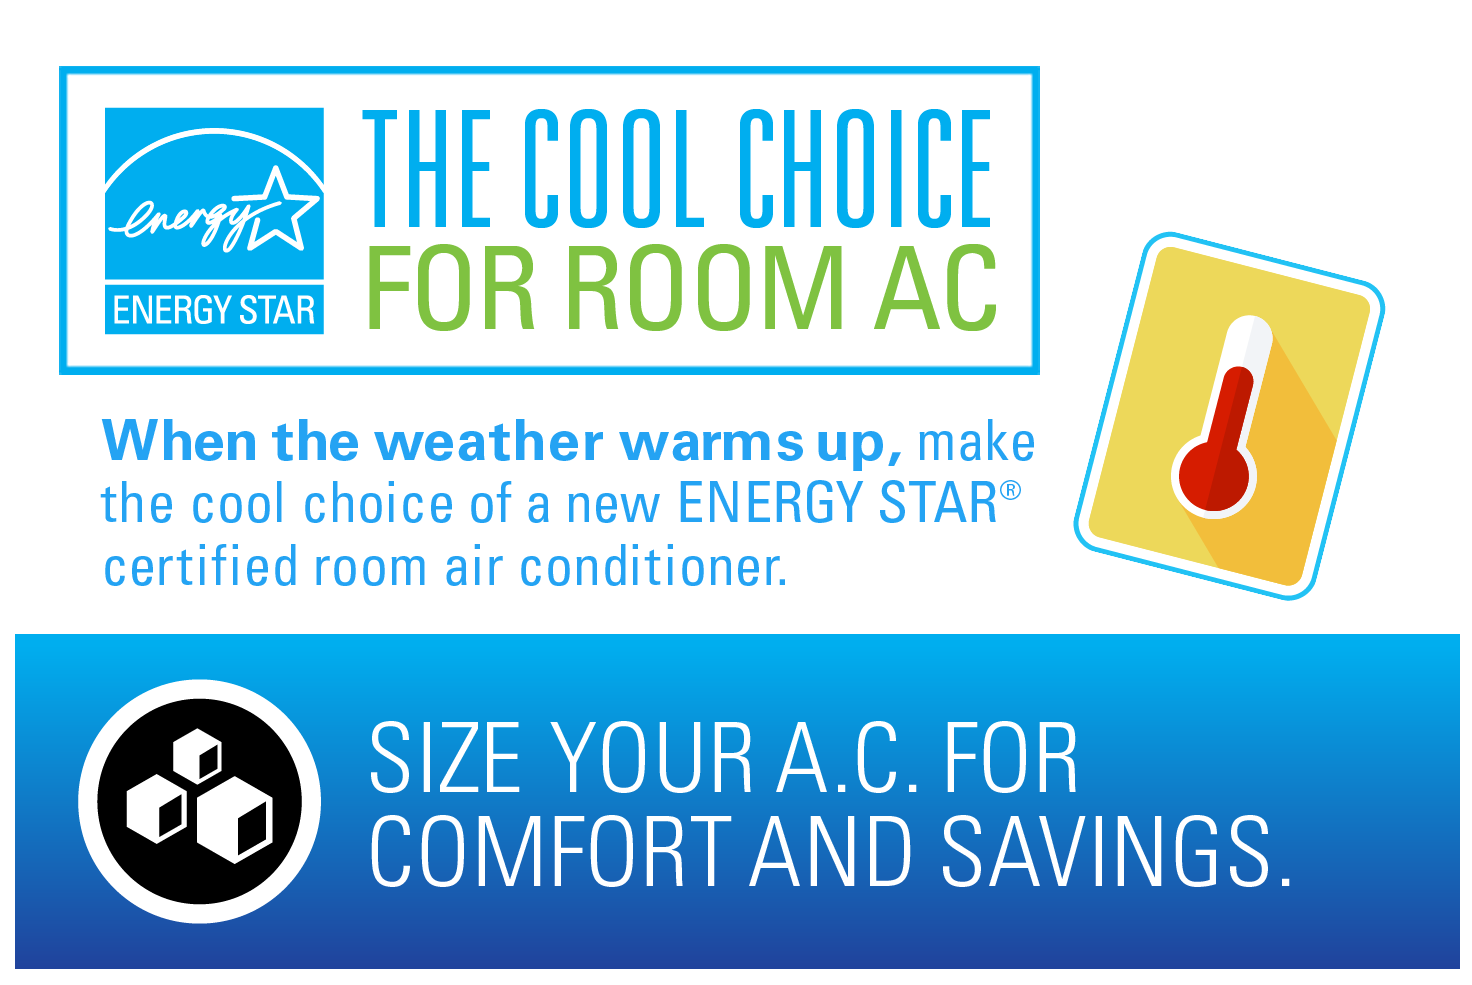 The cool choice for room air conditioners (AC).